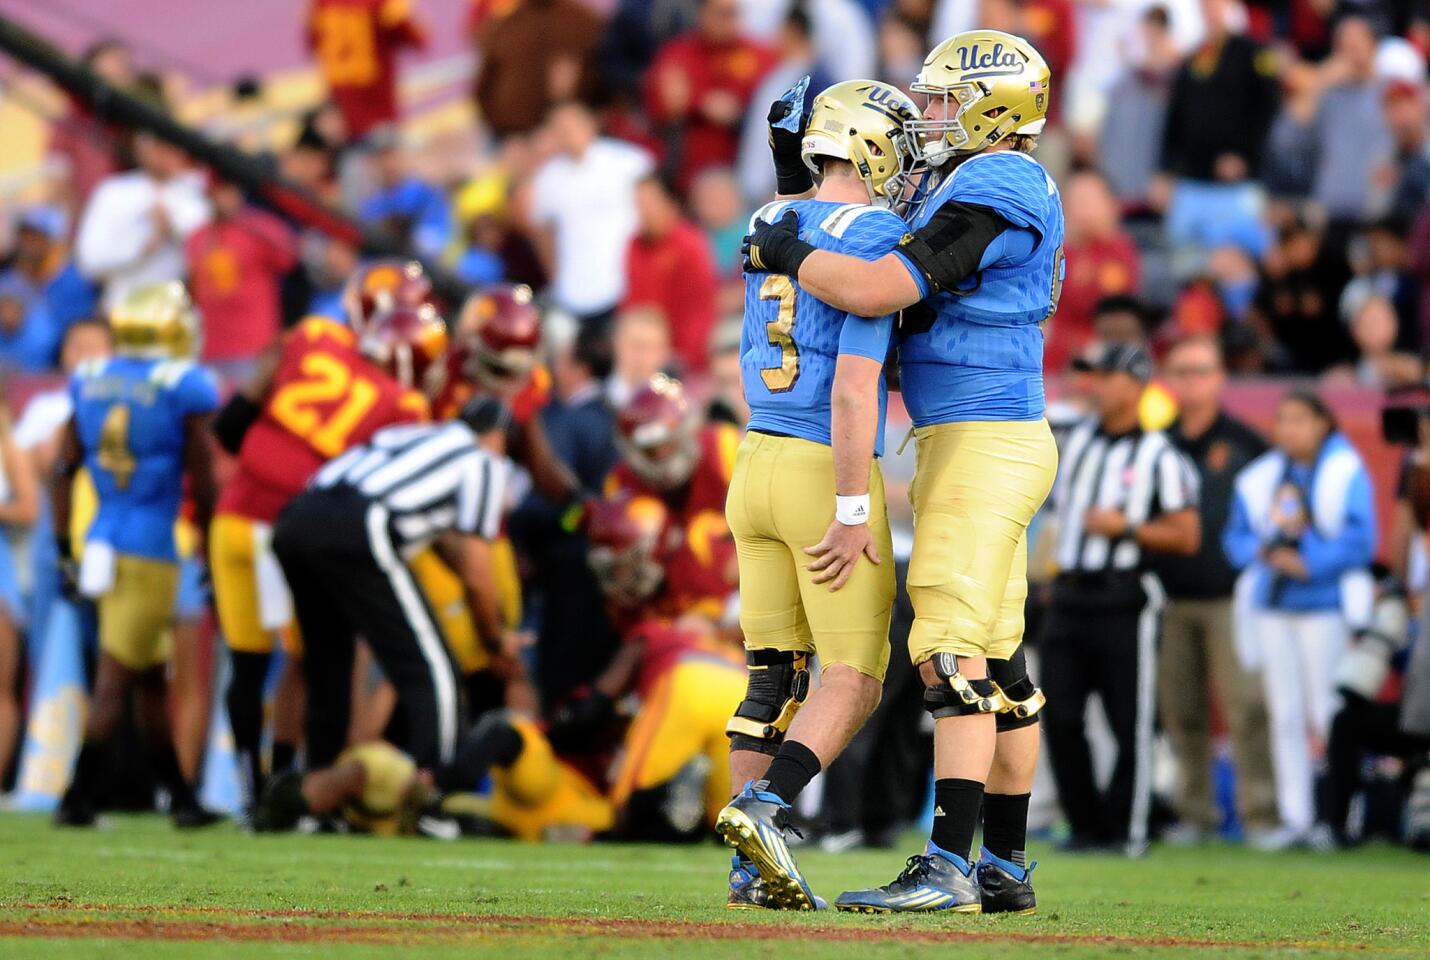 UCLA's Rosen takes blame for his worst game, doesn't give credit to USC defense